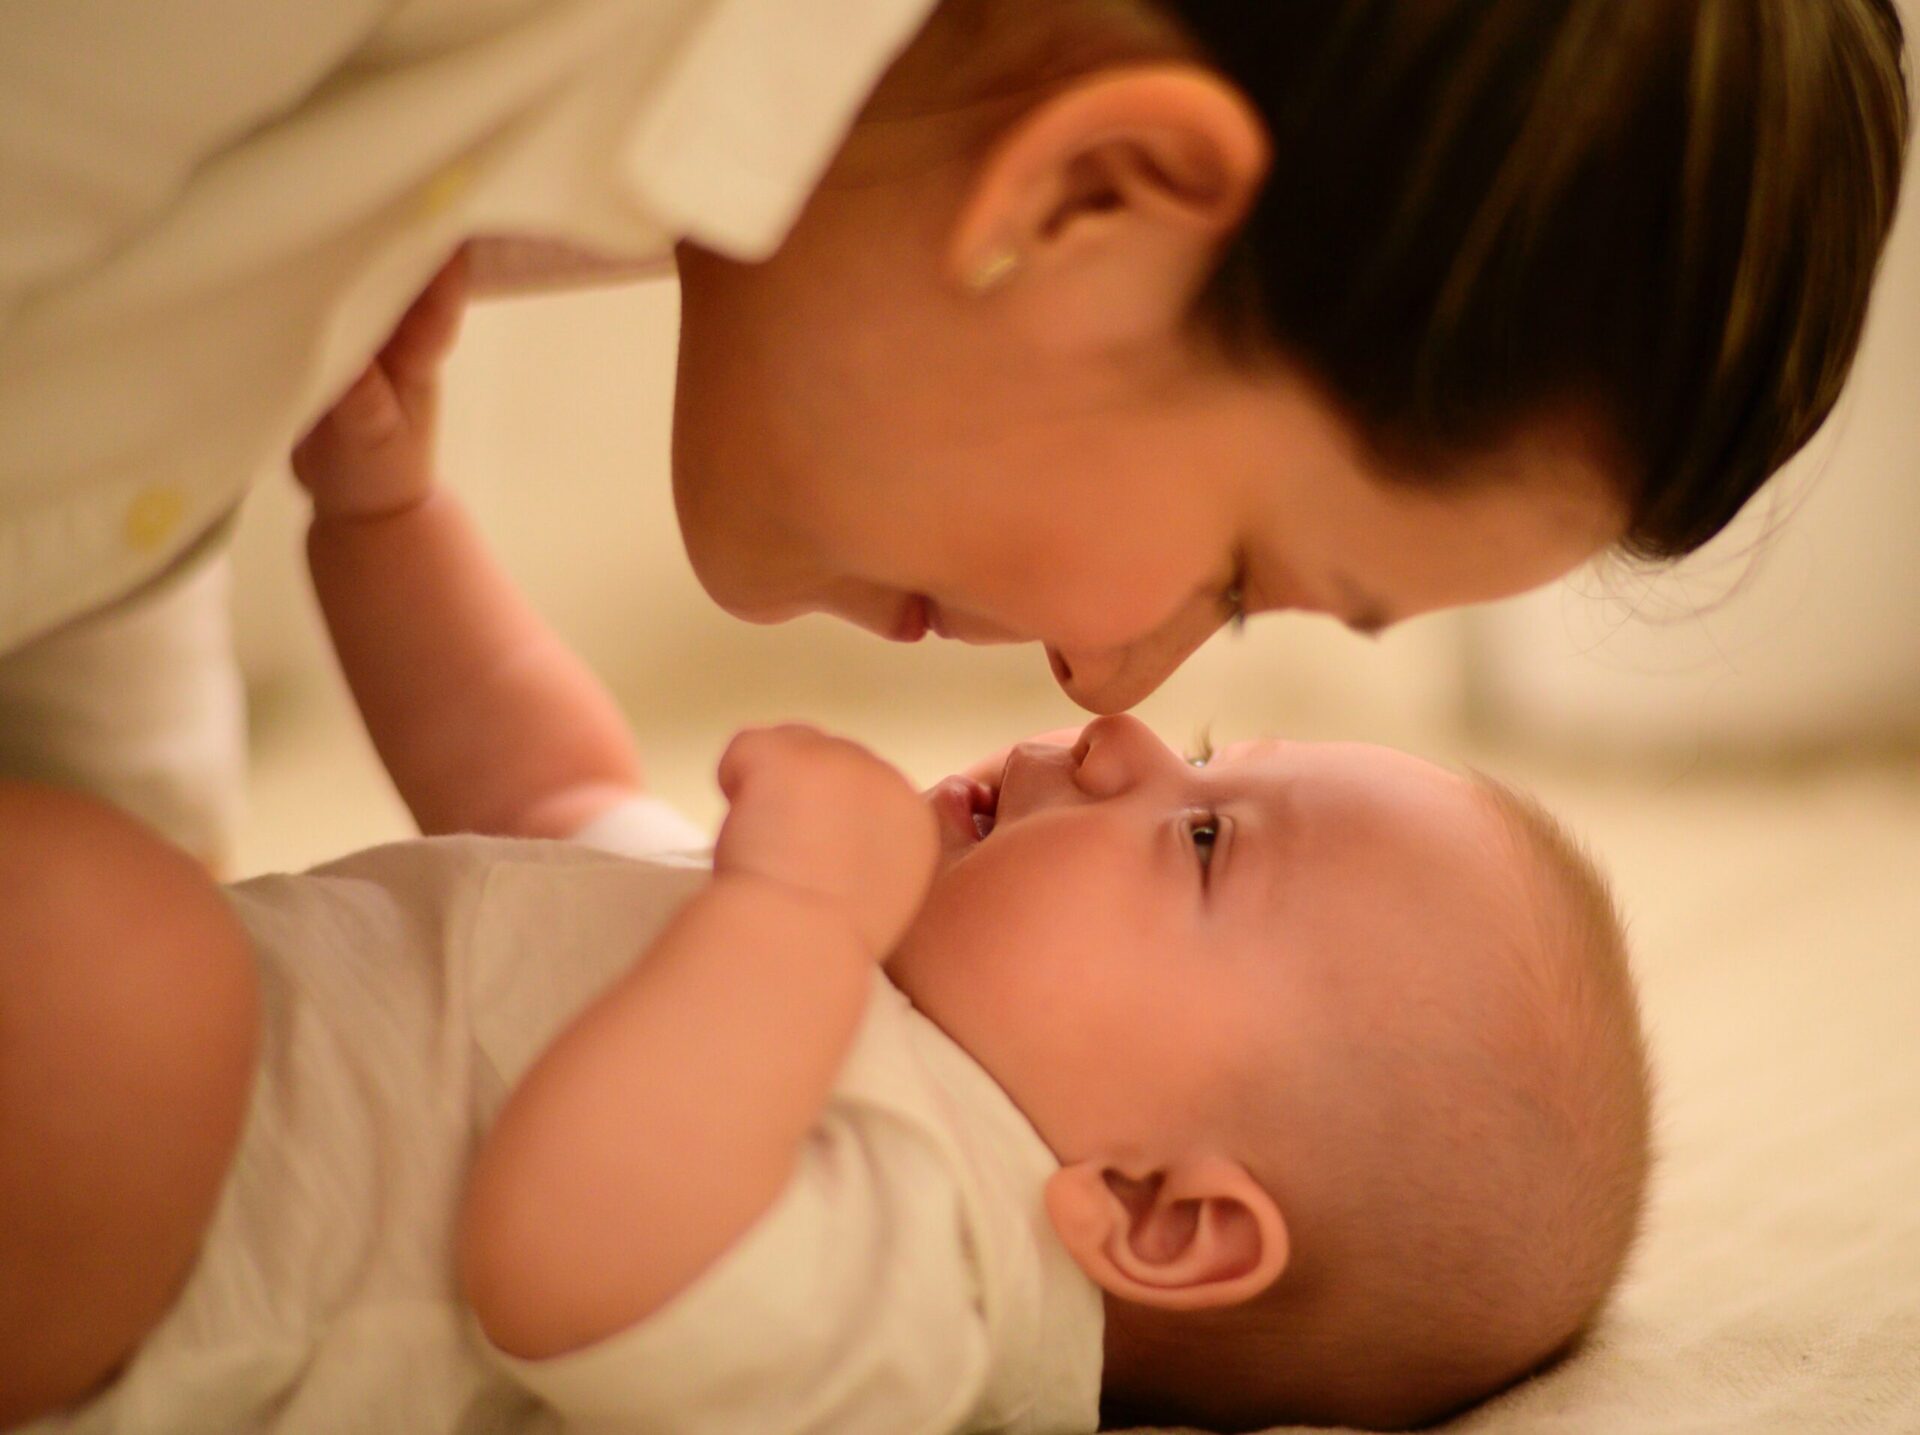 Woman holds her nose up to a baby's nose.